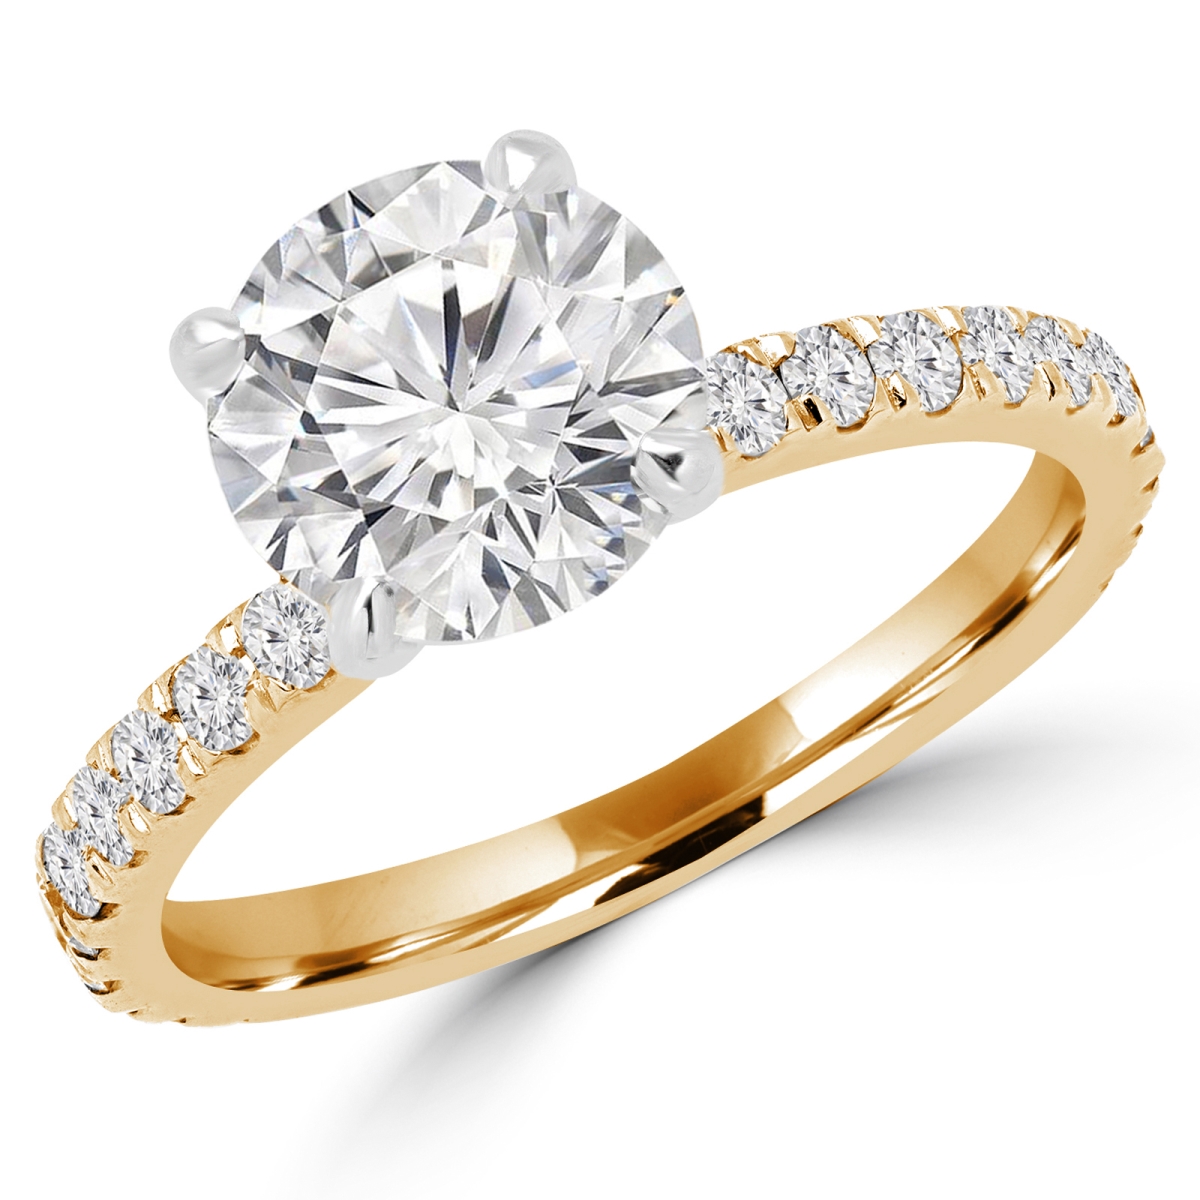 Picture of Majesty Diamonds MD160340-5 1 CTW Round Cut Diamond Multi Stone Engagement Ring in 14K Yellow Gold - Size 5